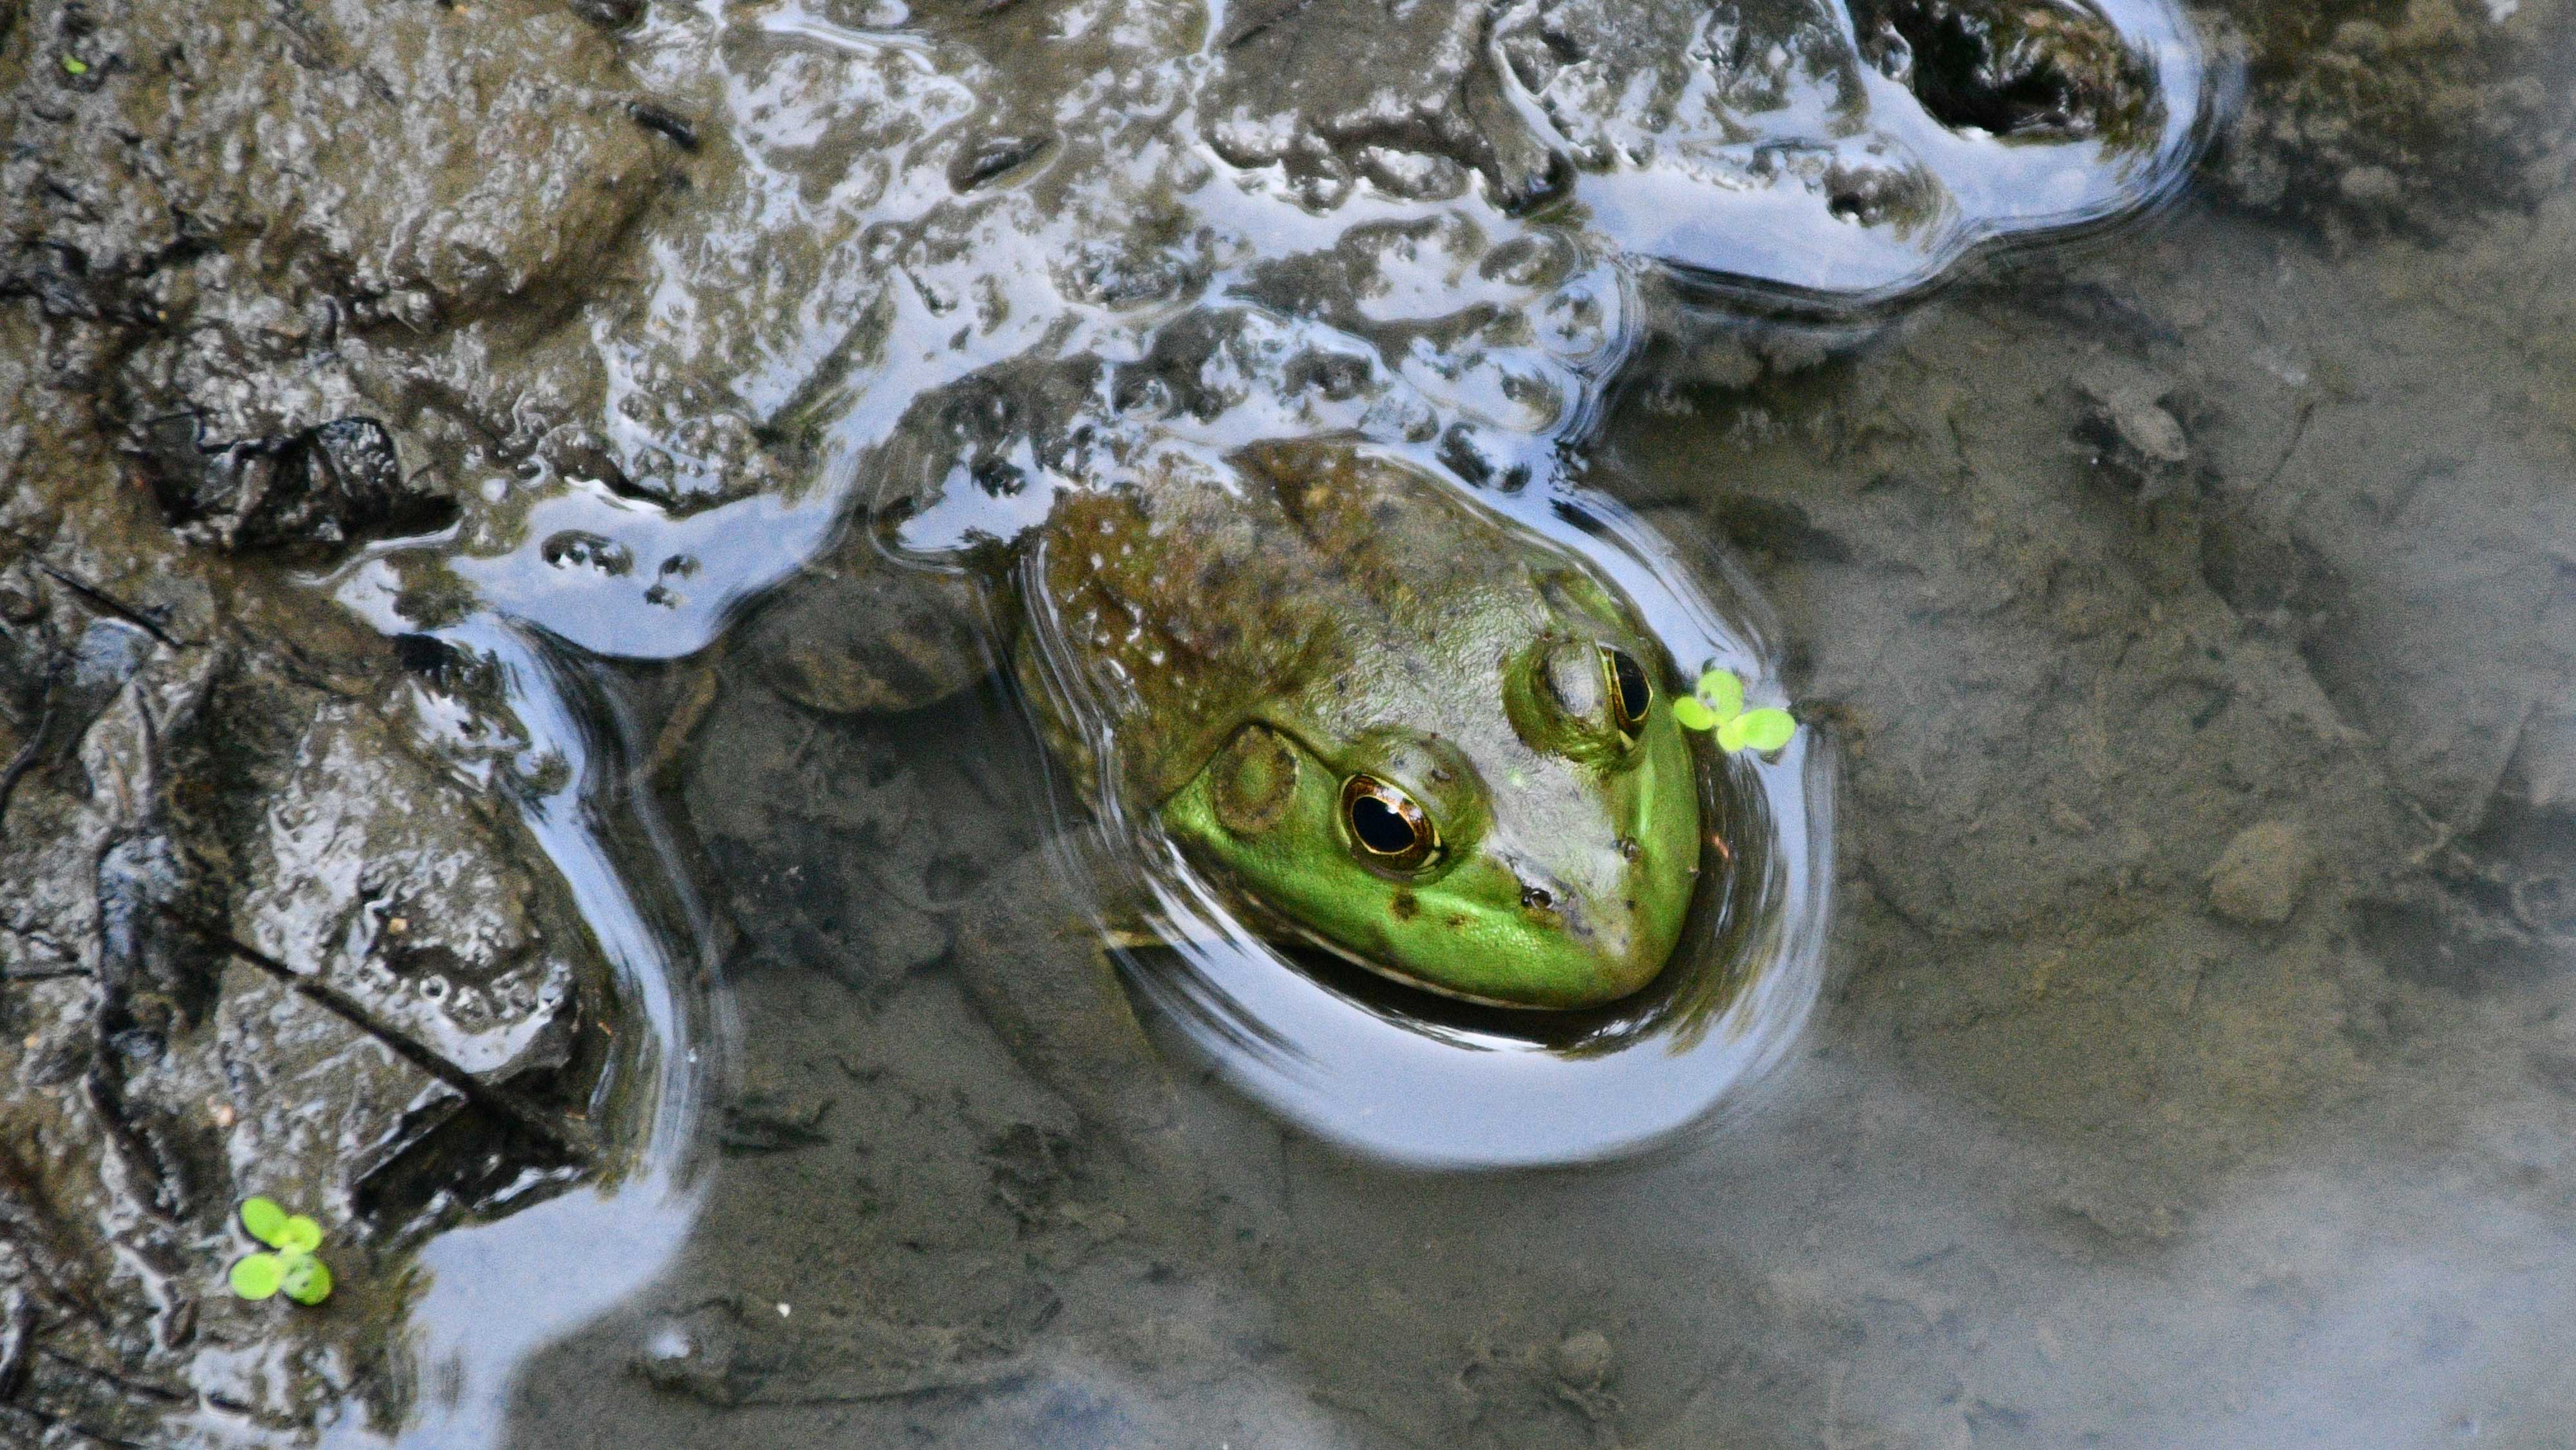 A bullfrog poking its head out of the water.